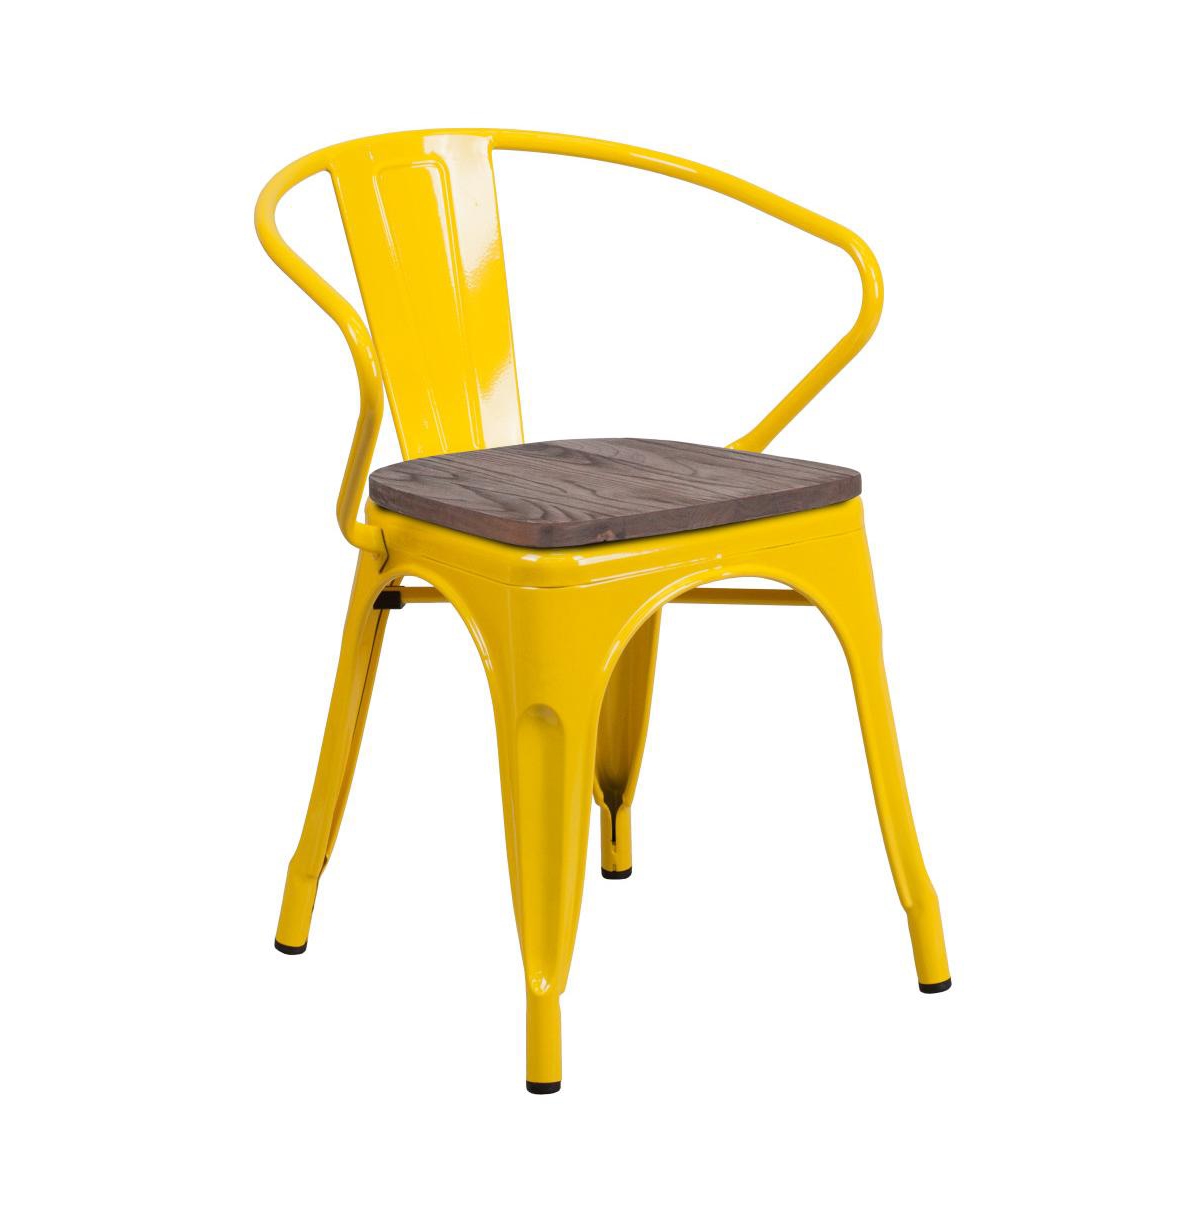 Emma+oliver Metal Chair With Wood Seat And Arms In Yellow